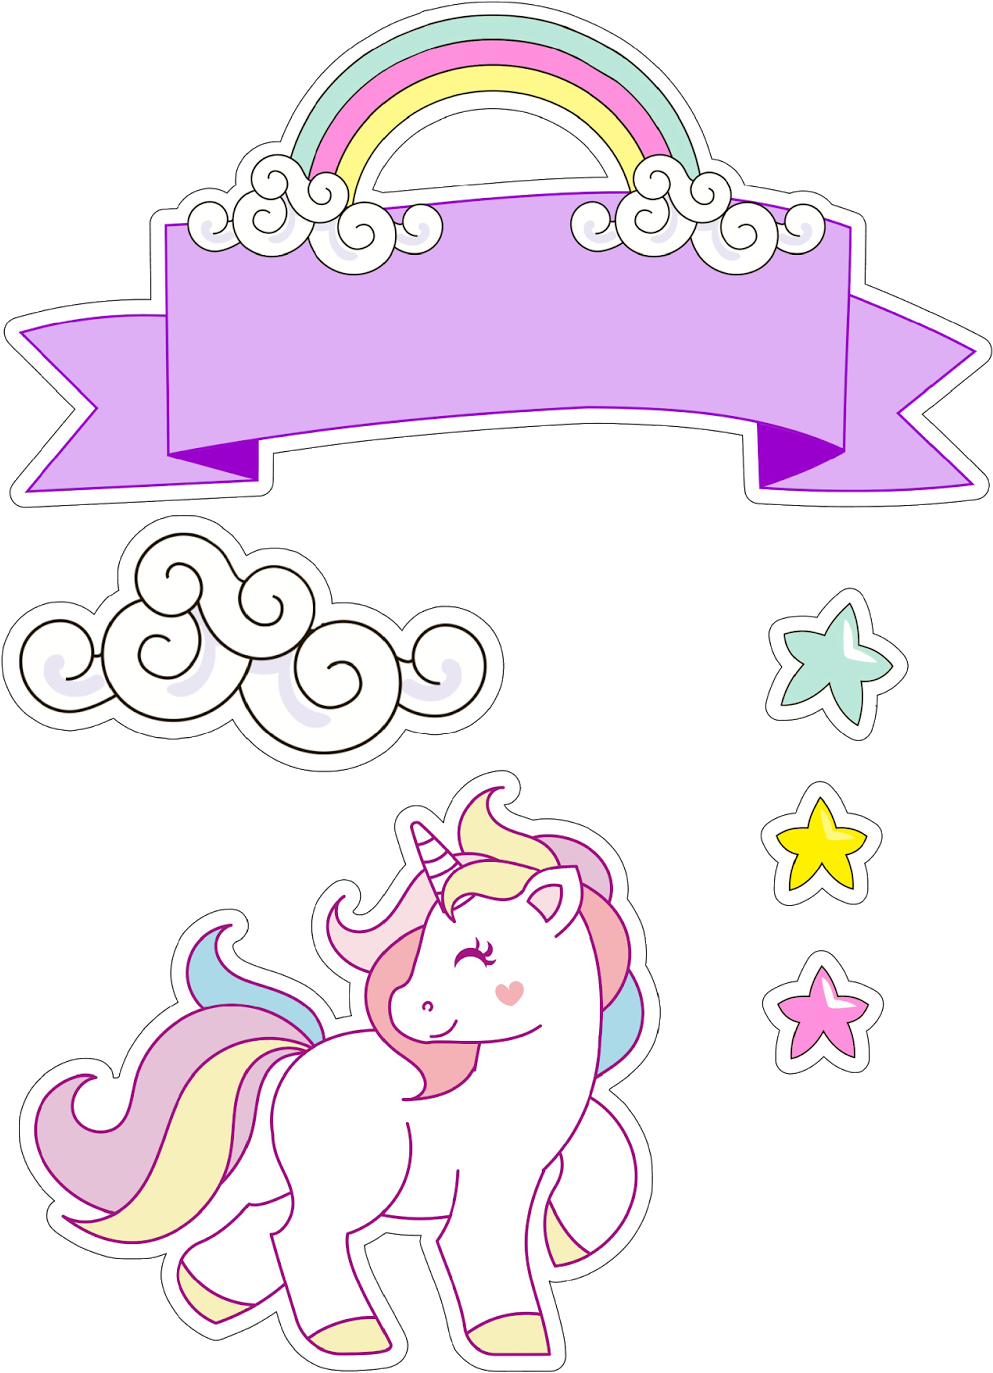 A Cartoon Unicorn With Clouds And Stars